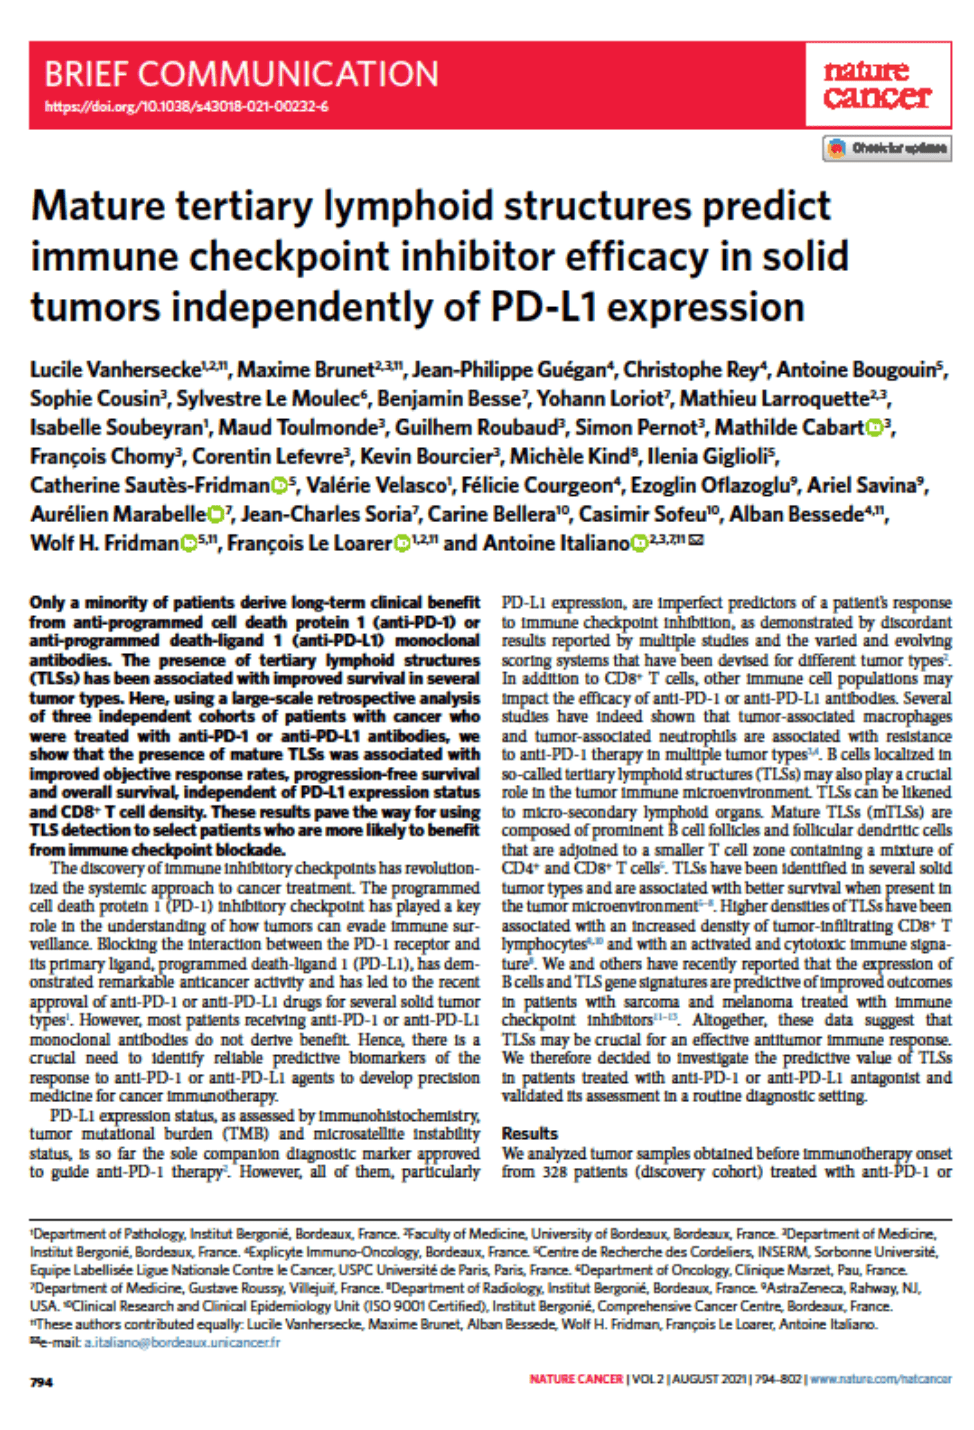 Mature tertiary lymphoid structures predict immune checkpoint inhibitor efficacy in solid tumors independently of PD-L1 